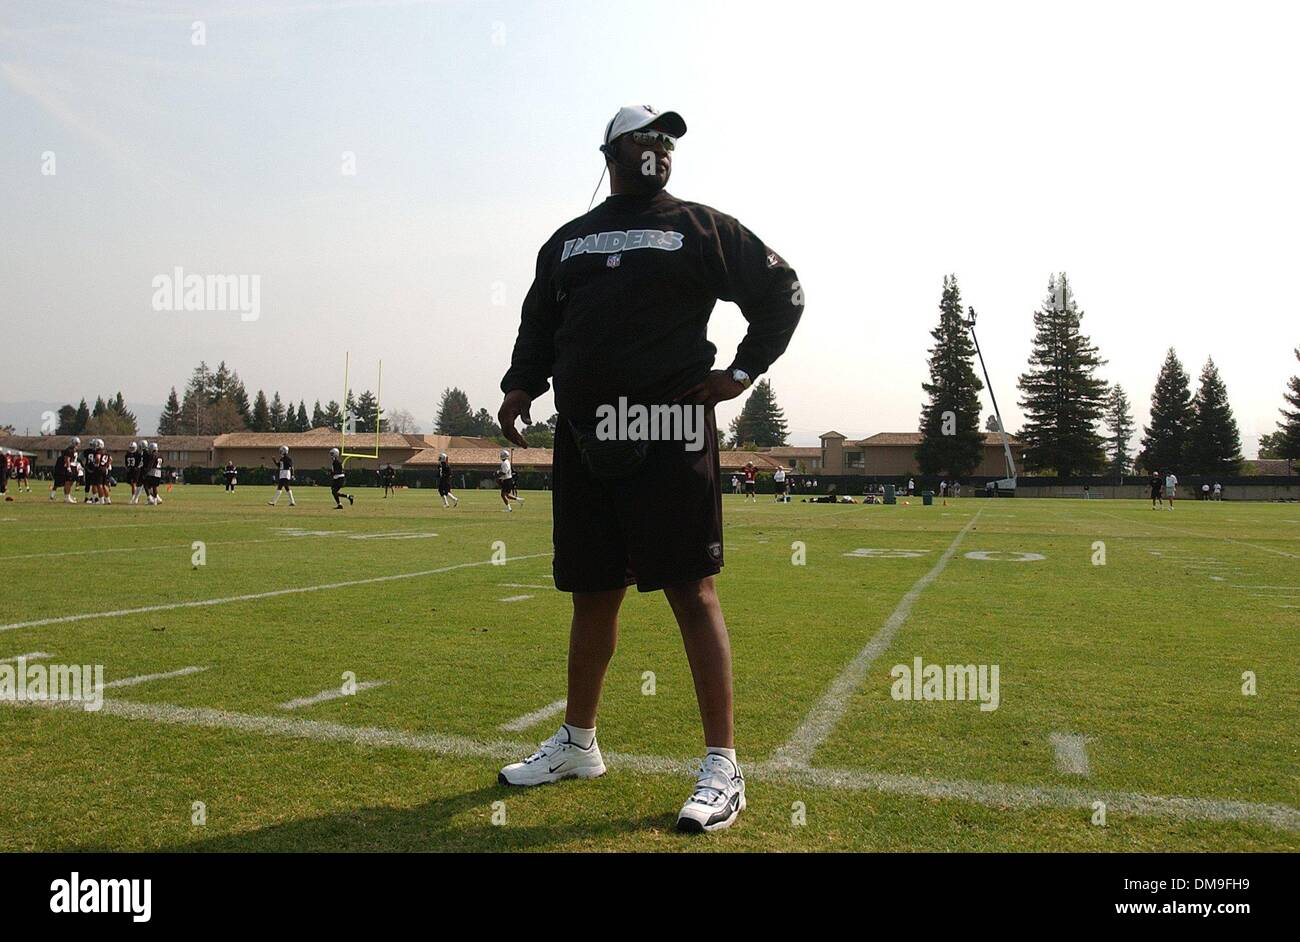 Field security, Don Hairston has worked for the Raiders for the last 18 years. Sacramento Bee photograph by Jose Luis Villegas July 30, 2002/ZUMA Press Stock Photo